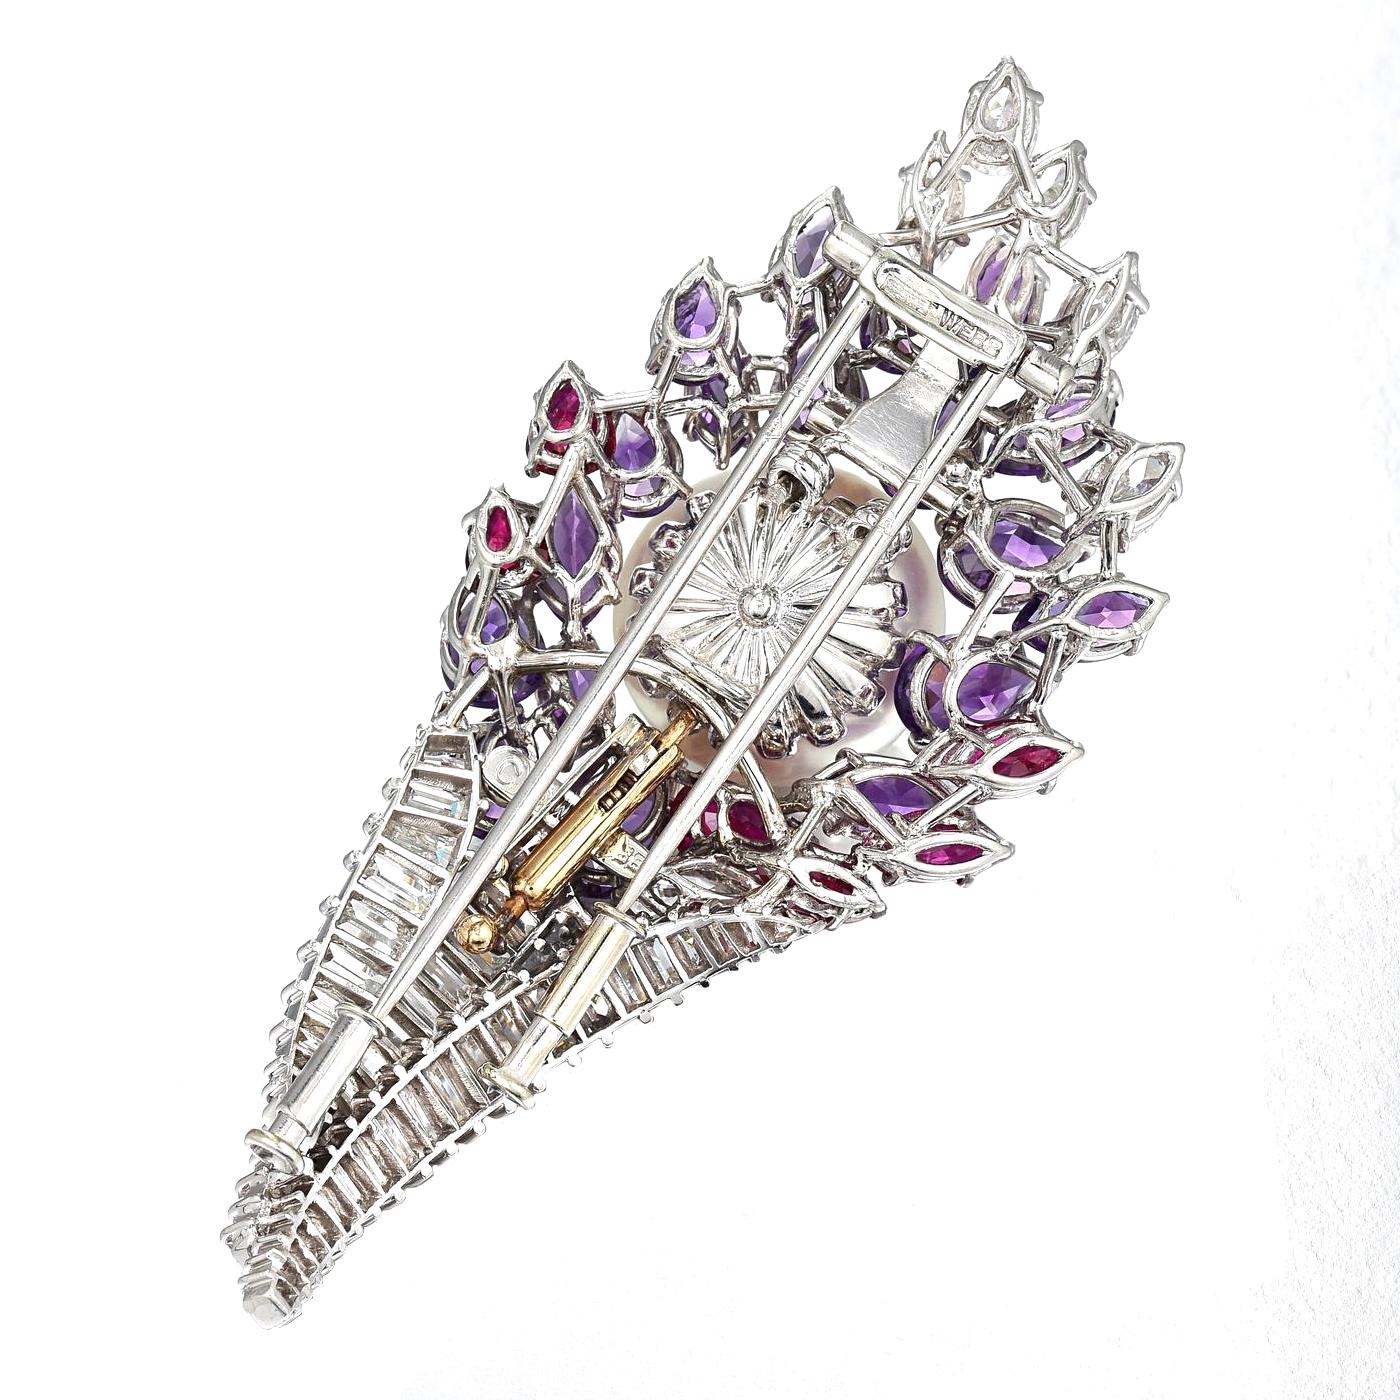 Crafted in platinum; set with baguette-, marquise- and pear brilliant-cut diamonds, weighing a total of approximately 6.30 carats, most with F-G color and VS clarity; accented by pear- and marquise-cut amethysts and rubies; button-shaped cultured